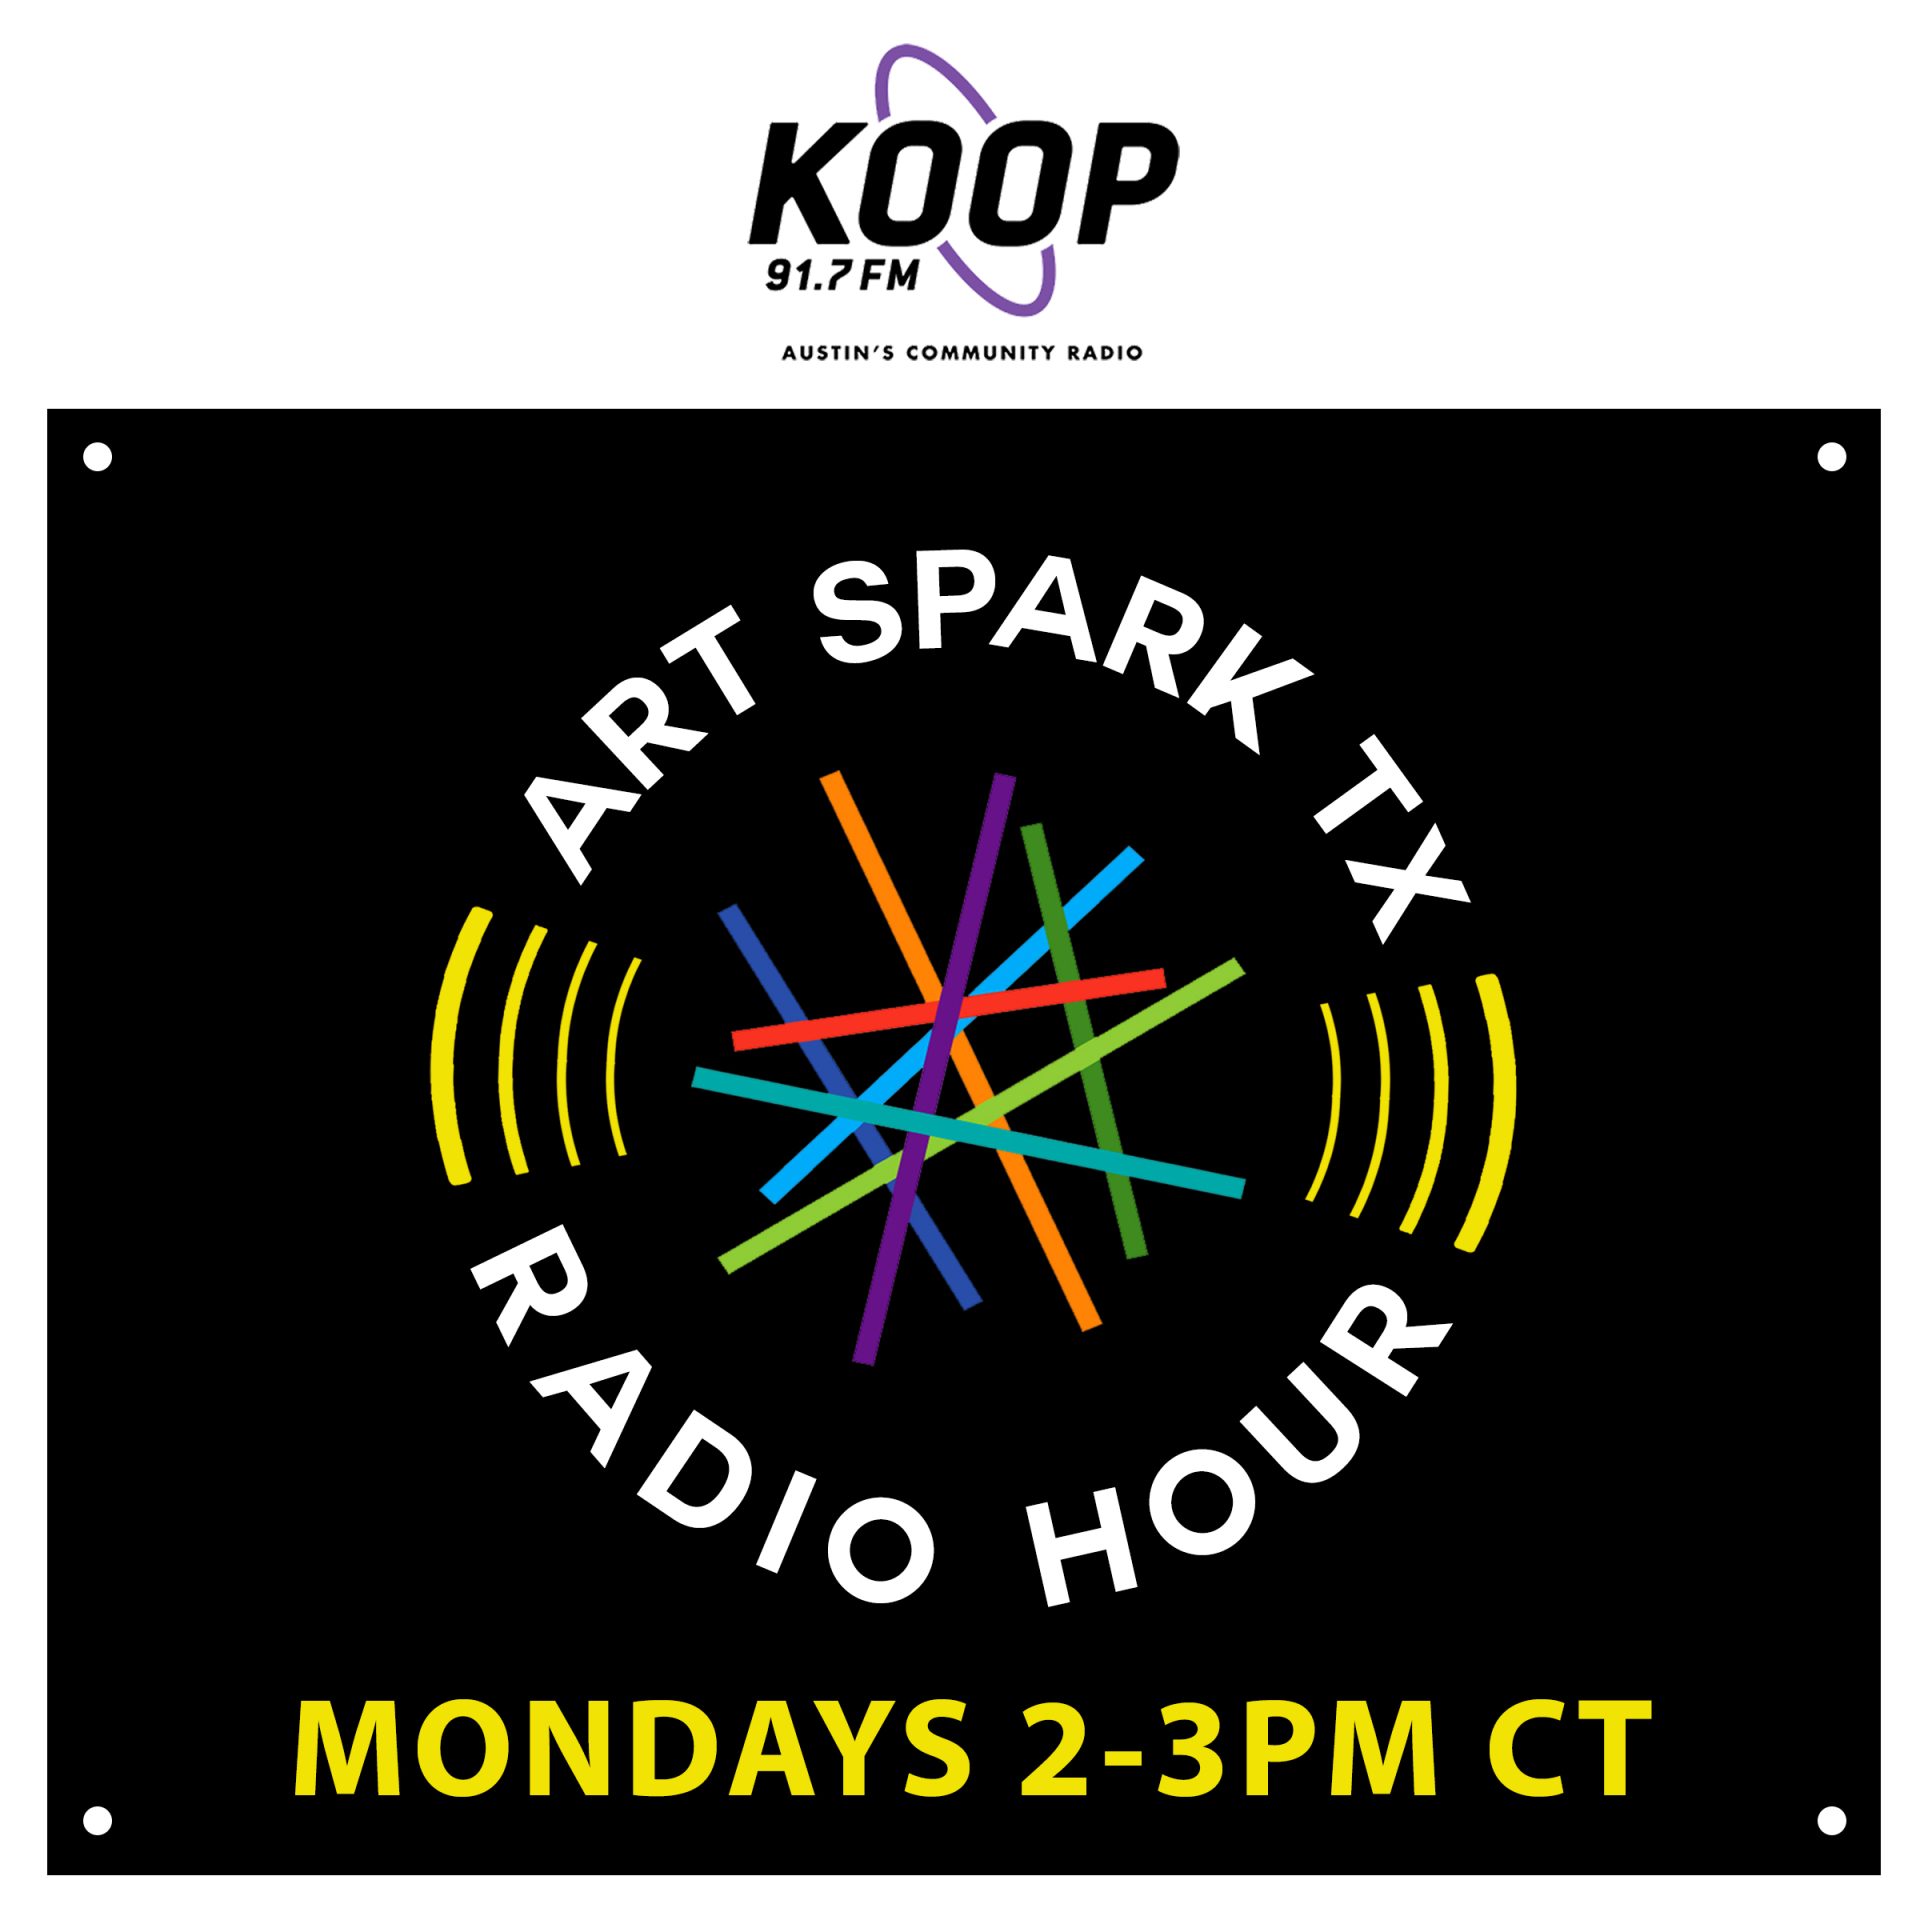 stylized graphic with text that reads, "Art Spark TX Radio Hour, Mondays 2:00-3:00 PM CT. Streaming live on KOOP.org."